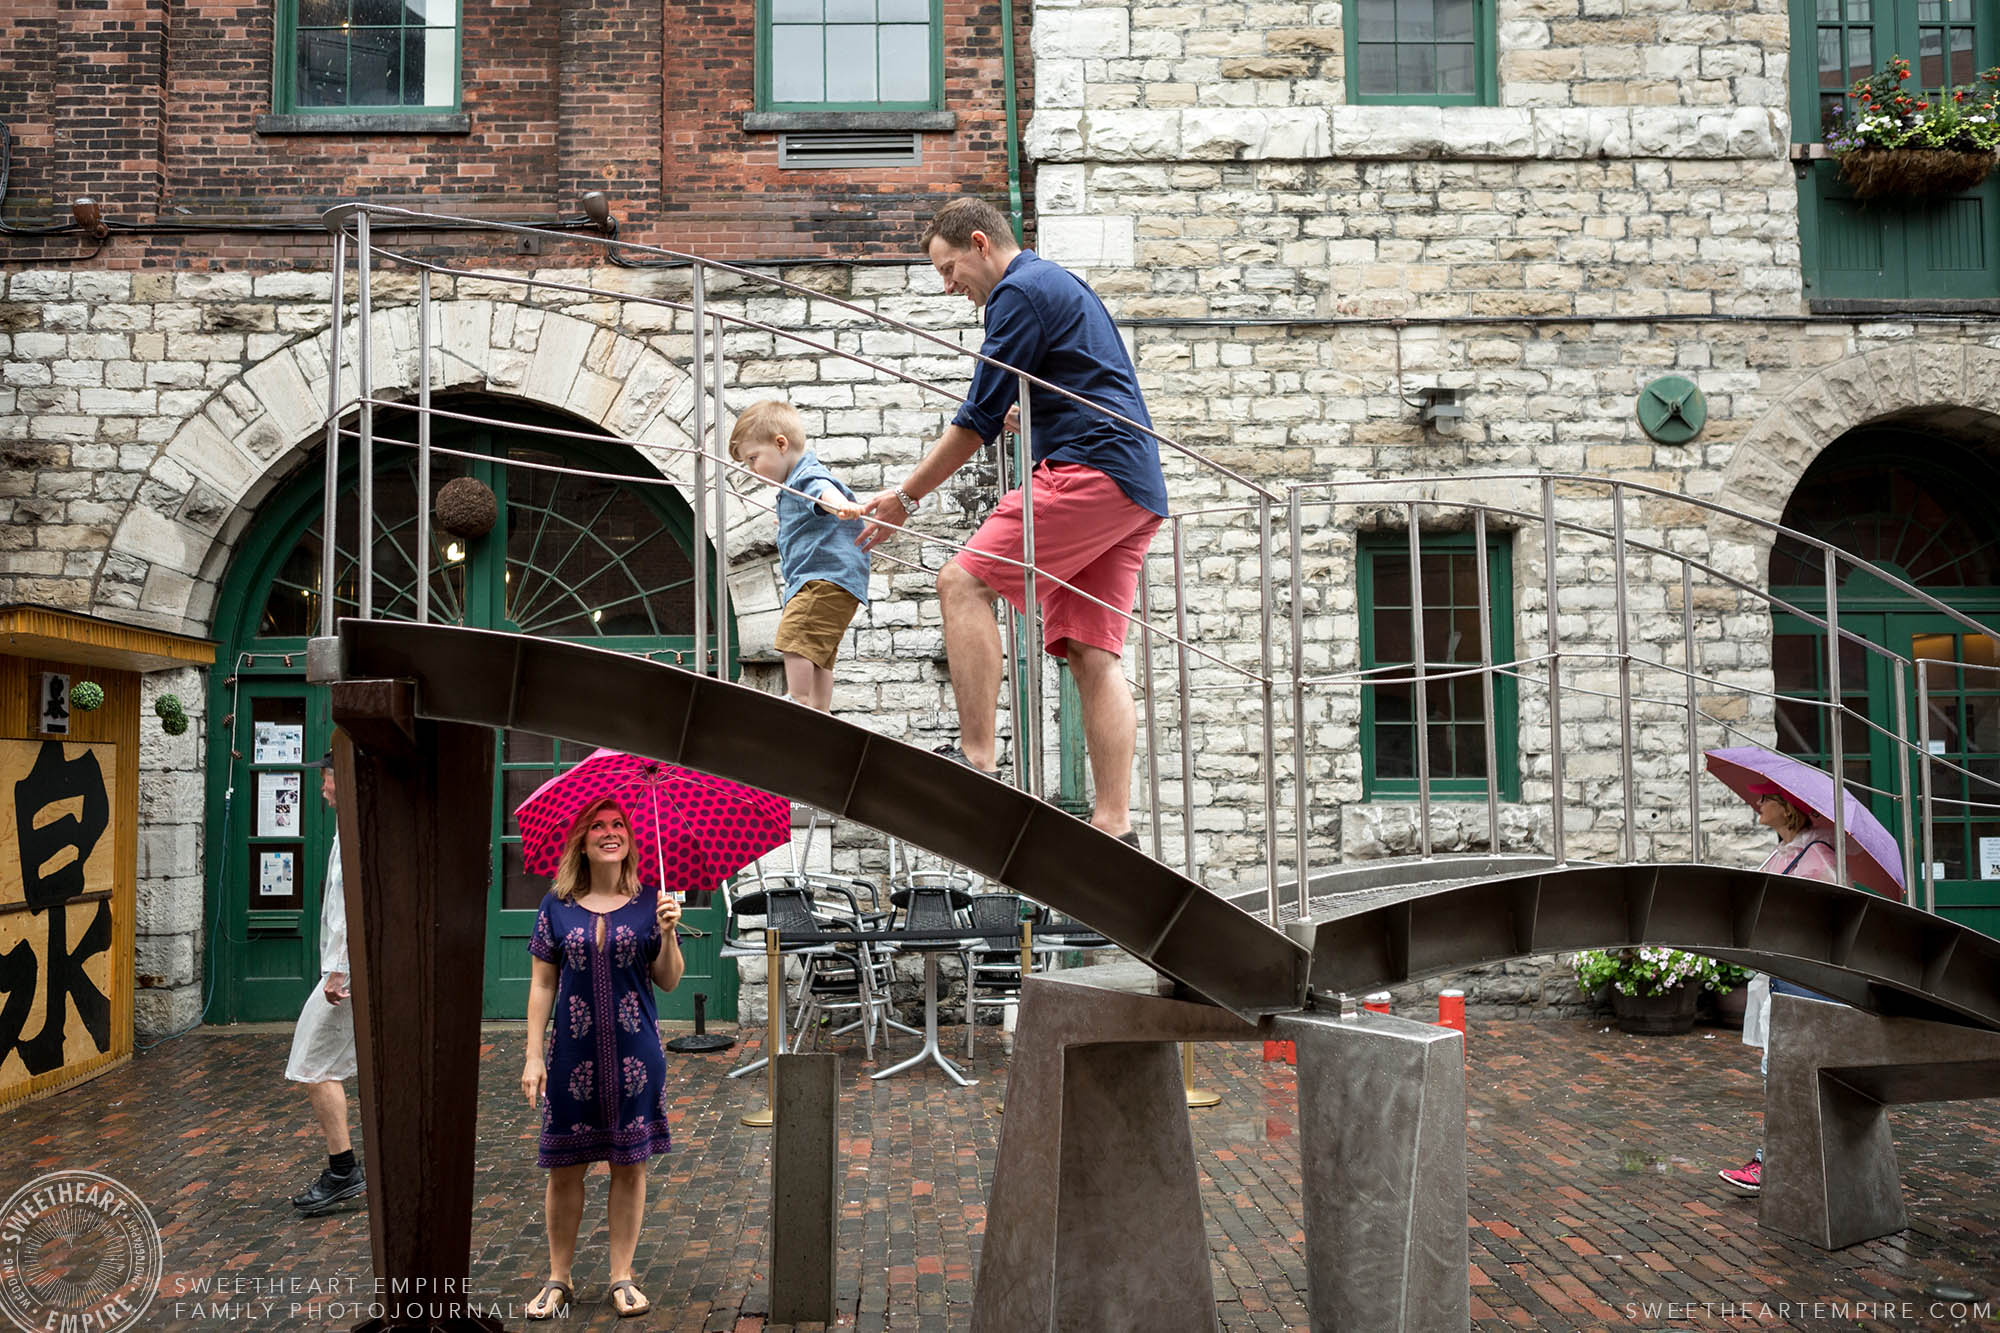 02_Father & toddler son climbing on sculptures in distillery district while concerned mom watches.jpg